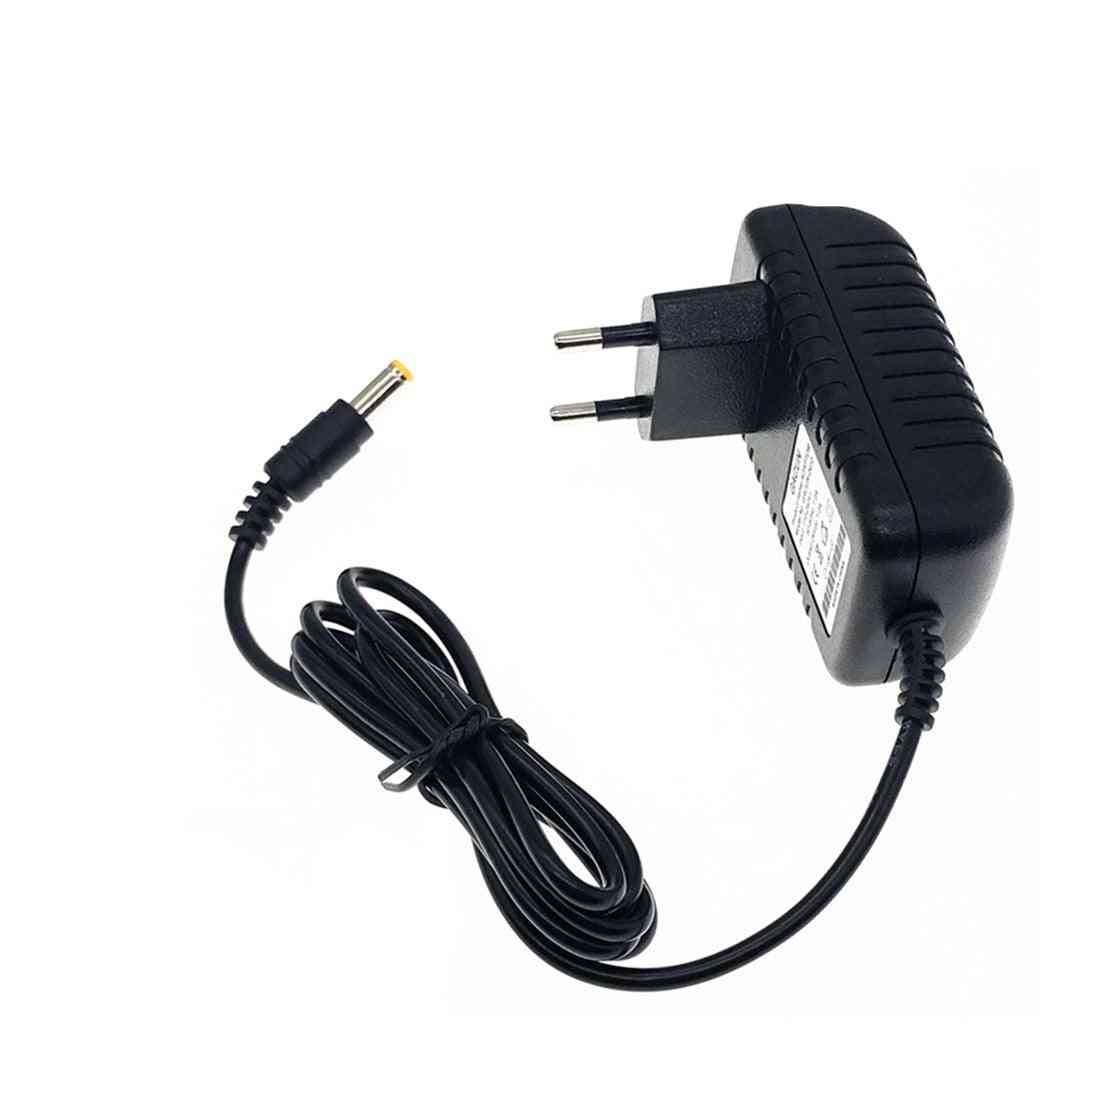 Ac 110-240v Dc Universal Power Adapter/charger For Led Light Strips